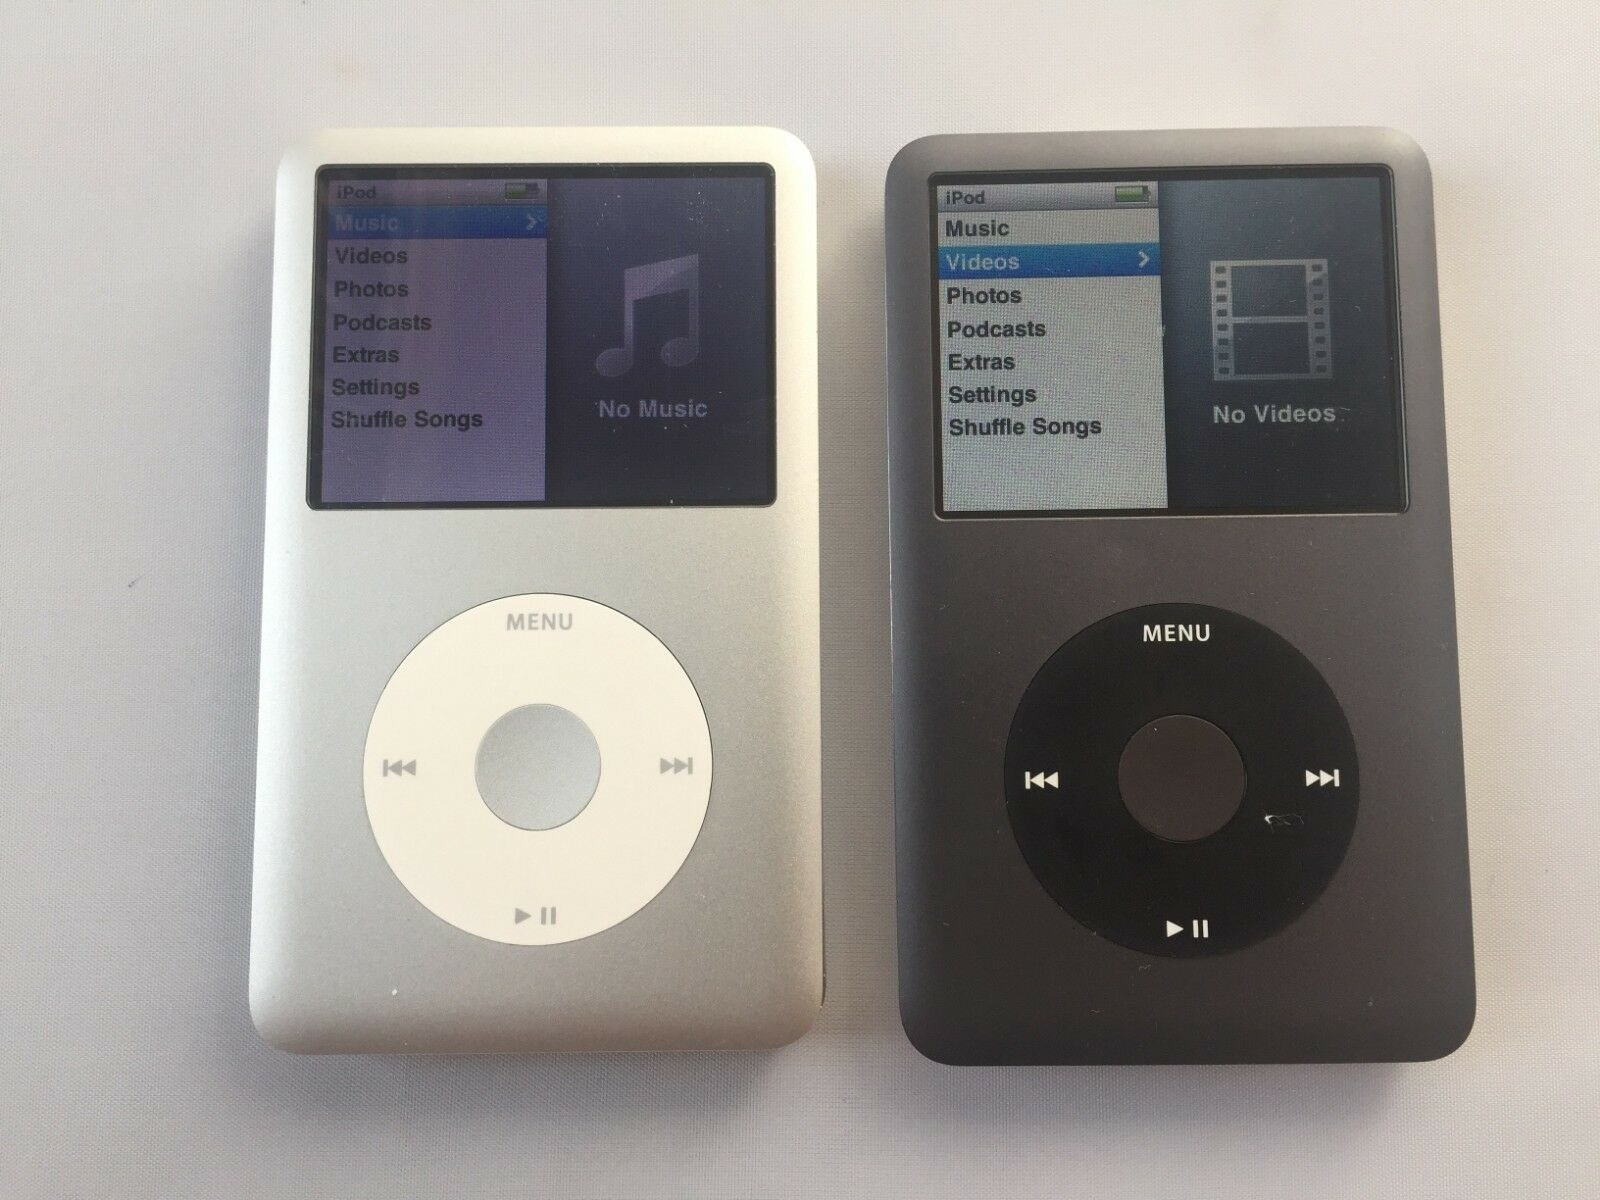 The silver and black versions of the Apple iPod classic